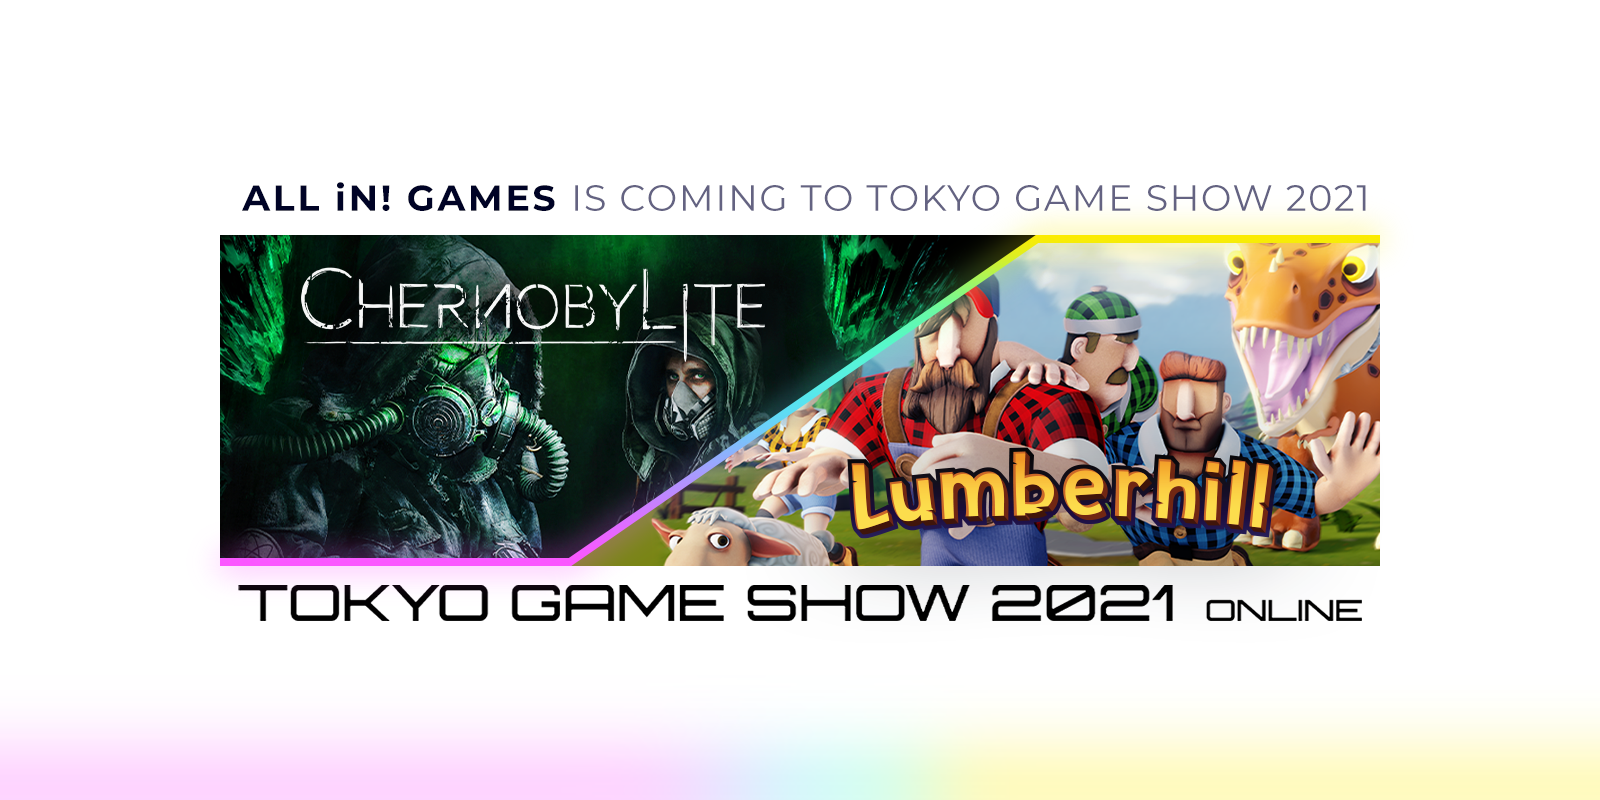 All in! Games coming to Tokyo Game Show 2021